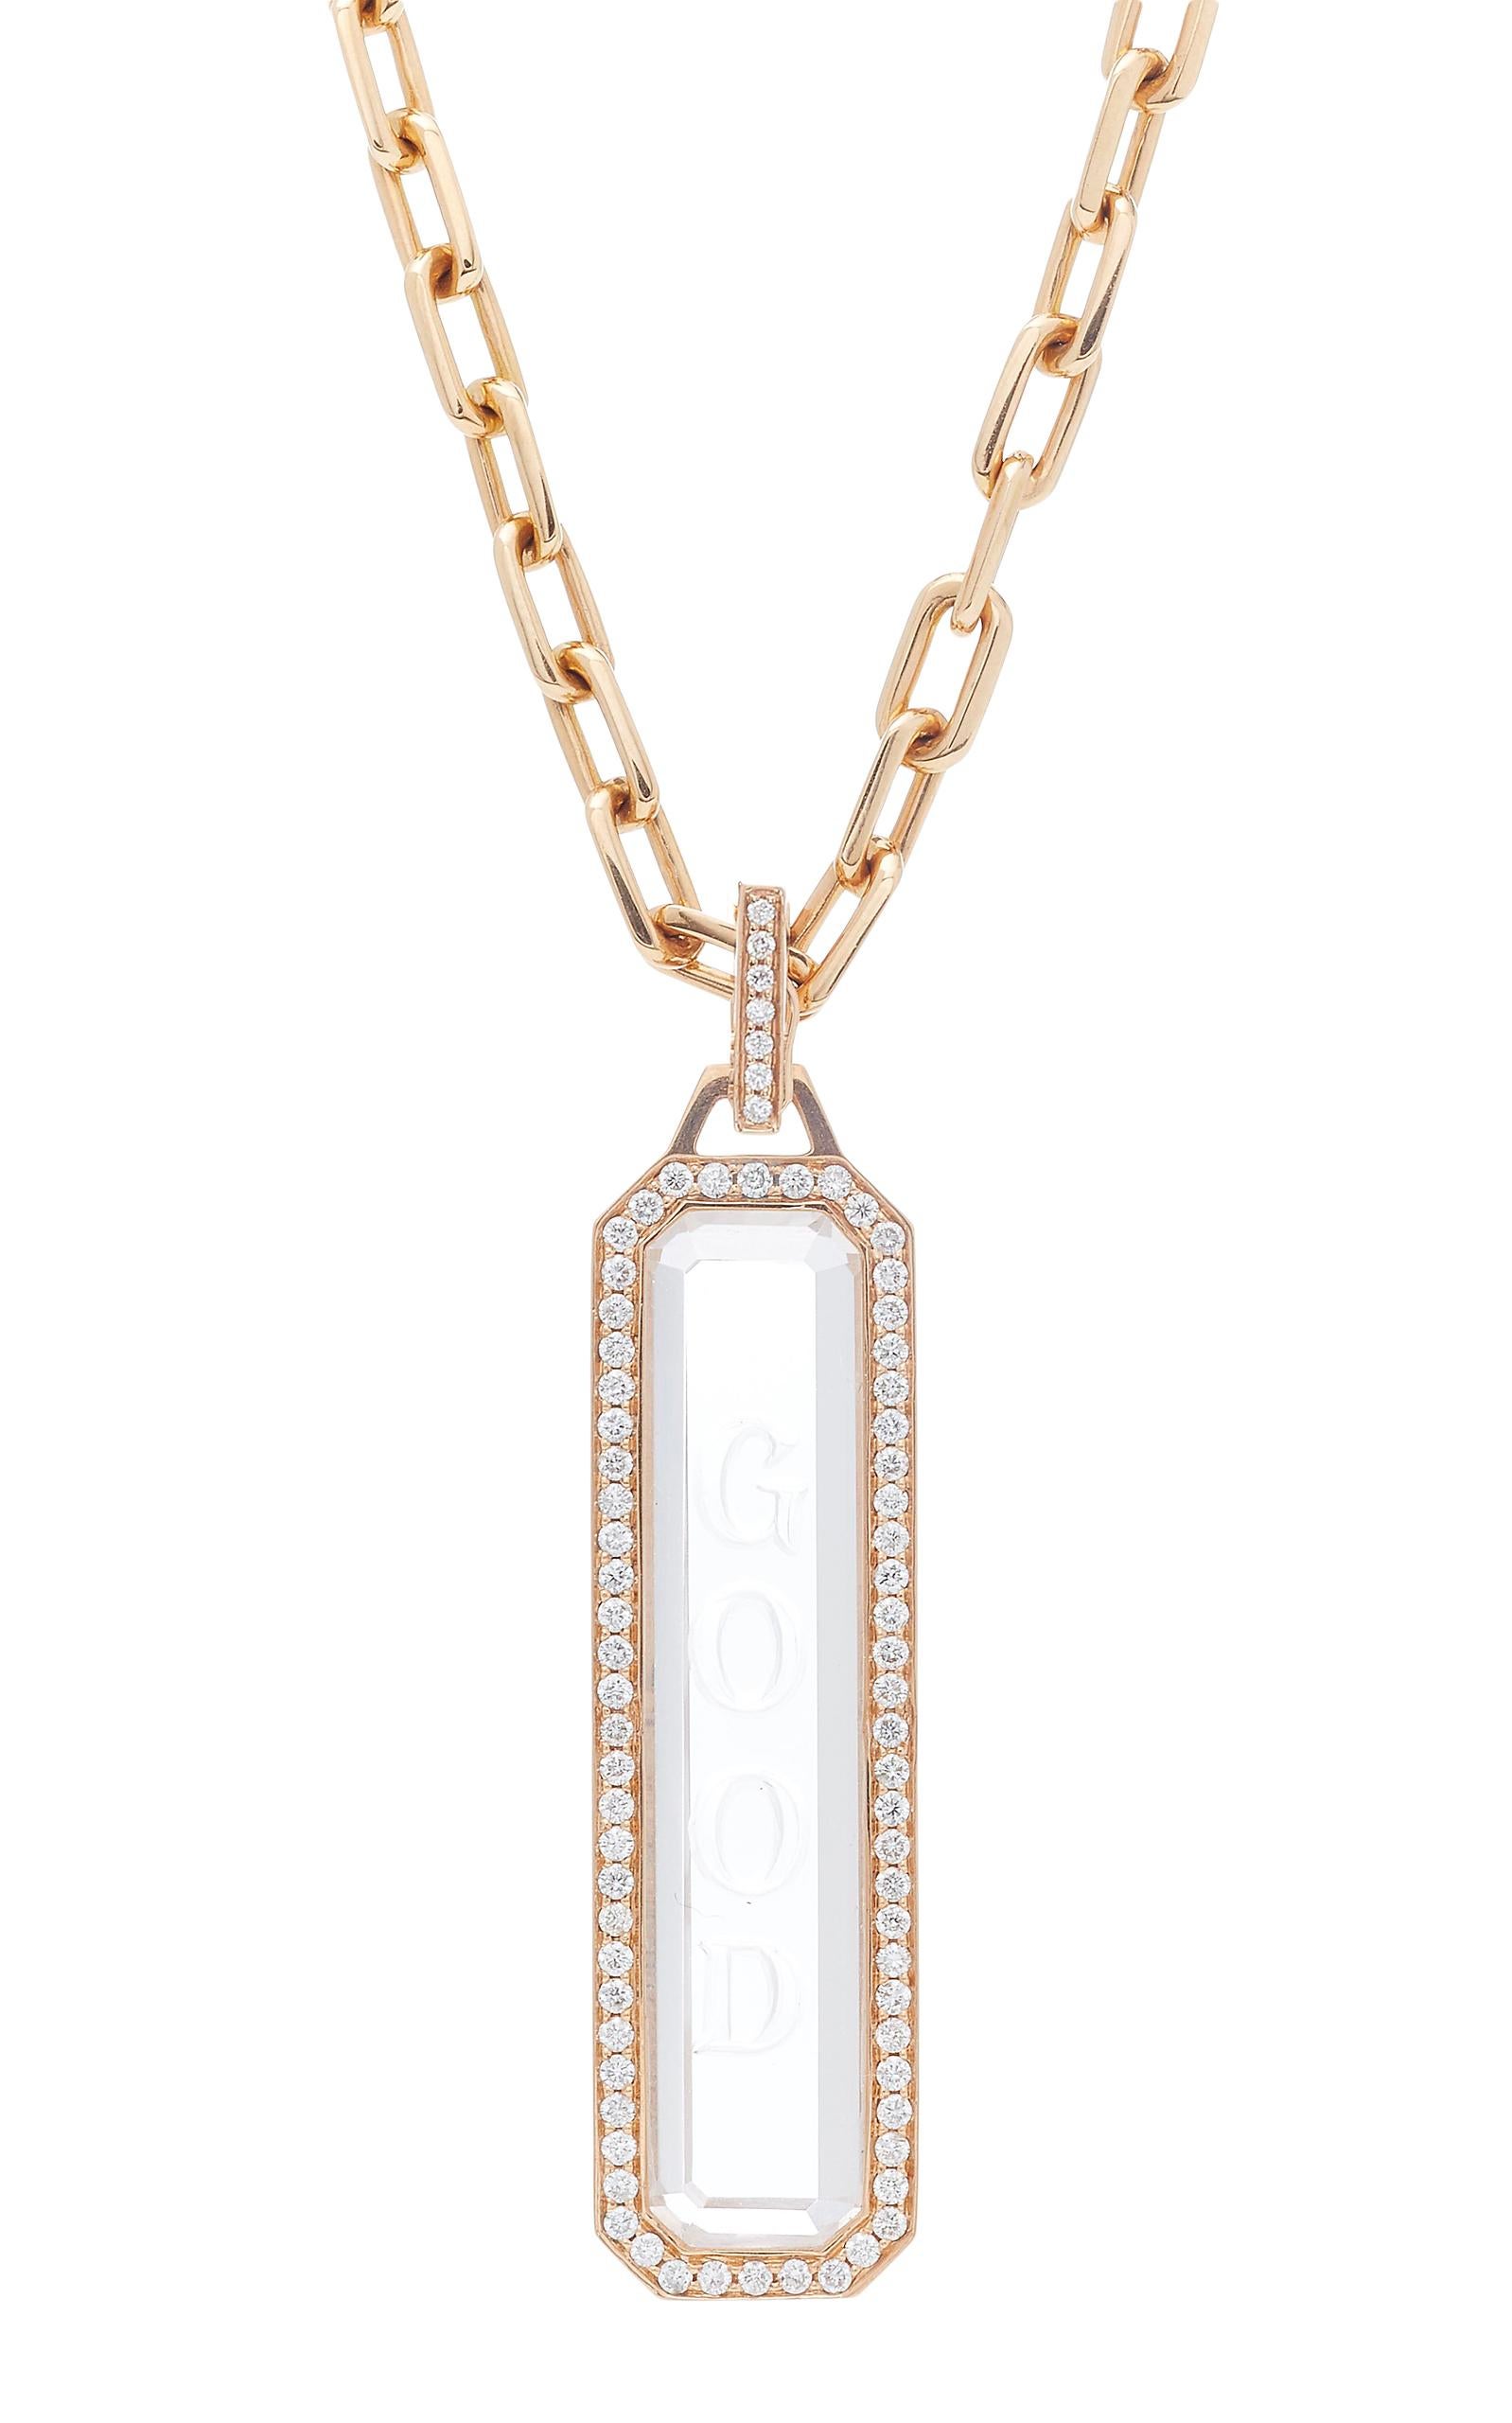 With a sophisticated juxtaposition of materials, this diamond and rock crystal pendant is elegant in shape and design. Combine it with other pendants on a Walters Faith chain to make a bold statement. Add your initials for a custom touch. 

Diamond